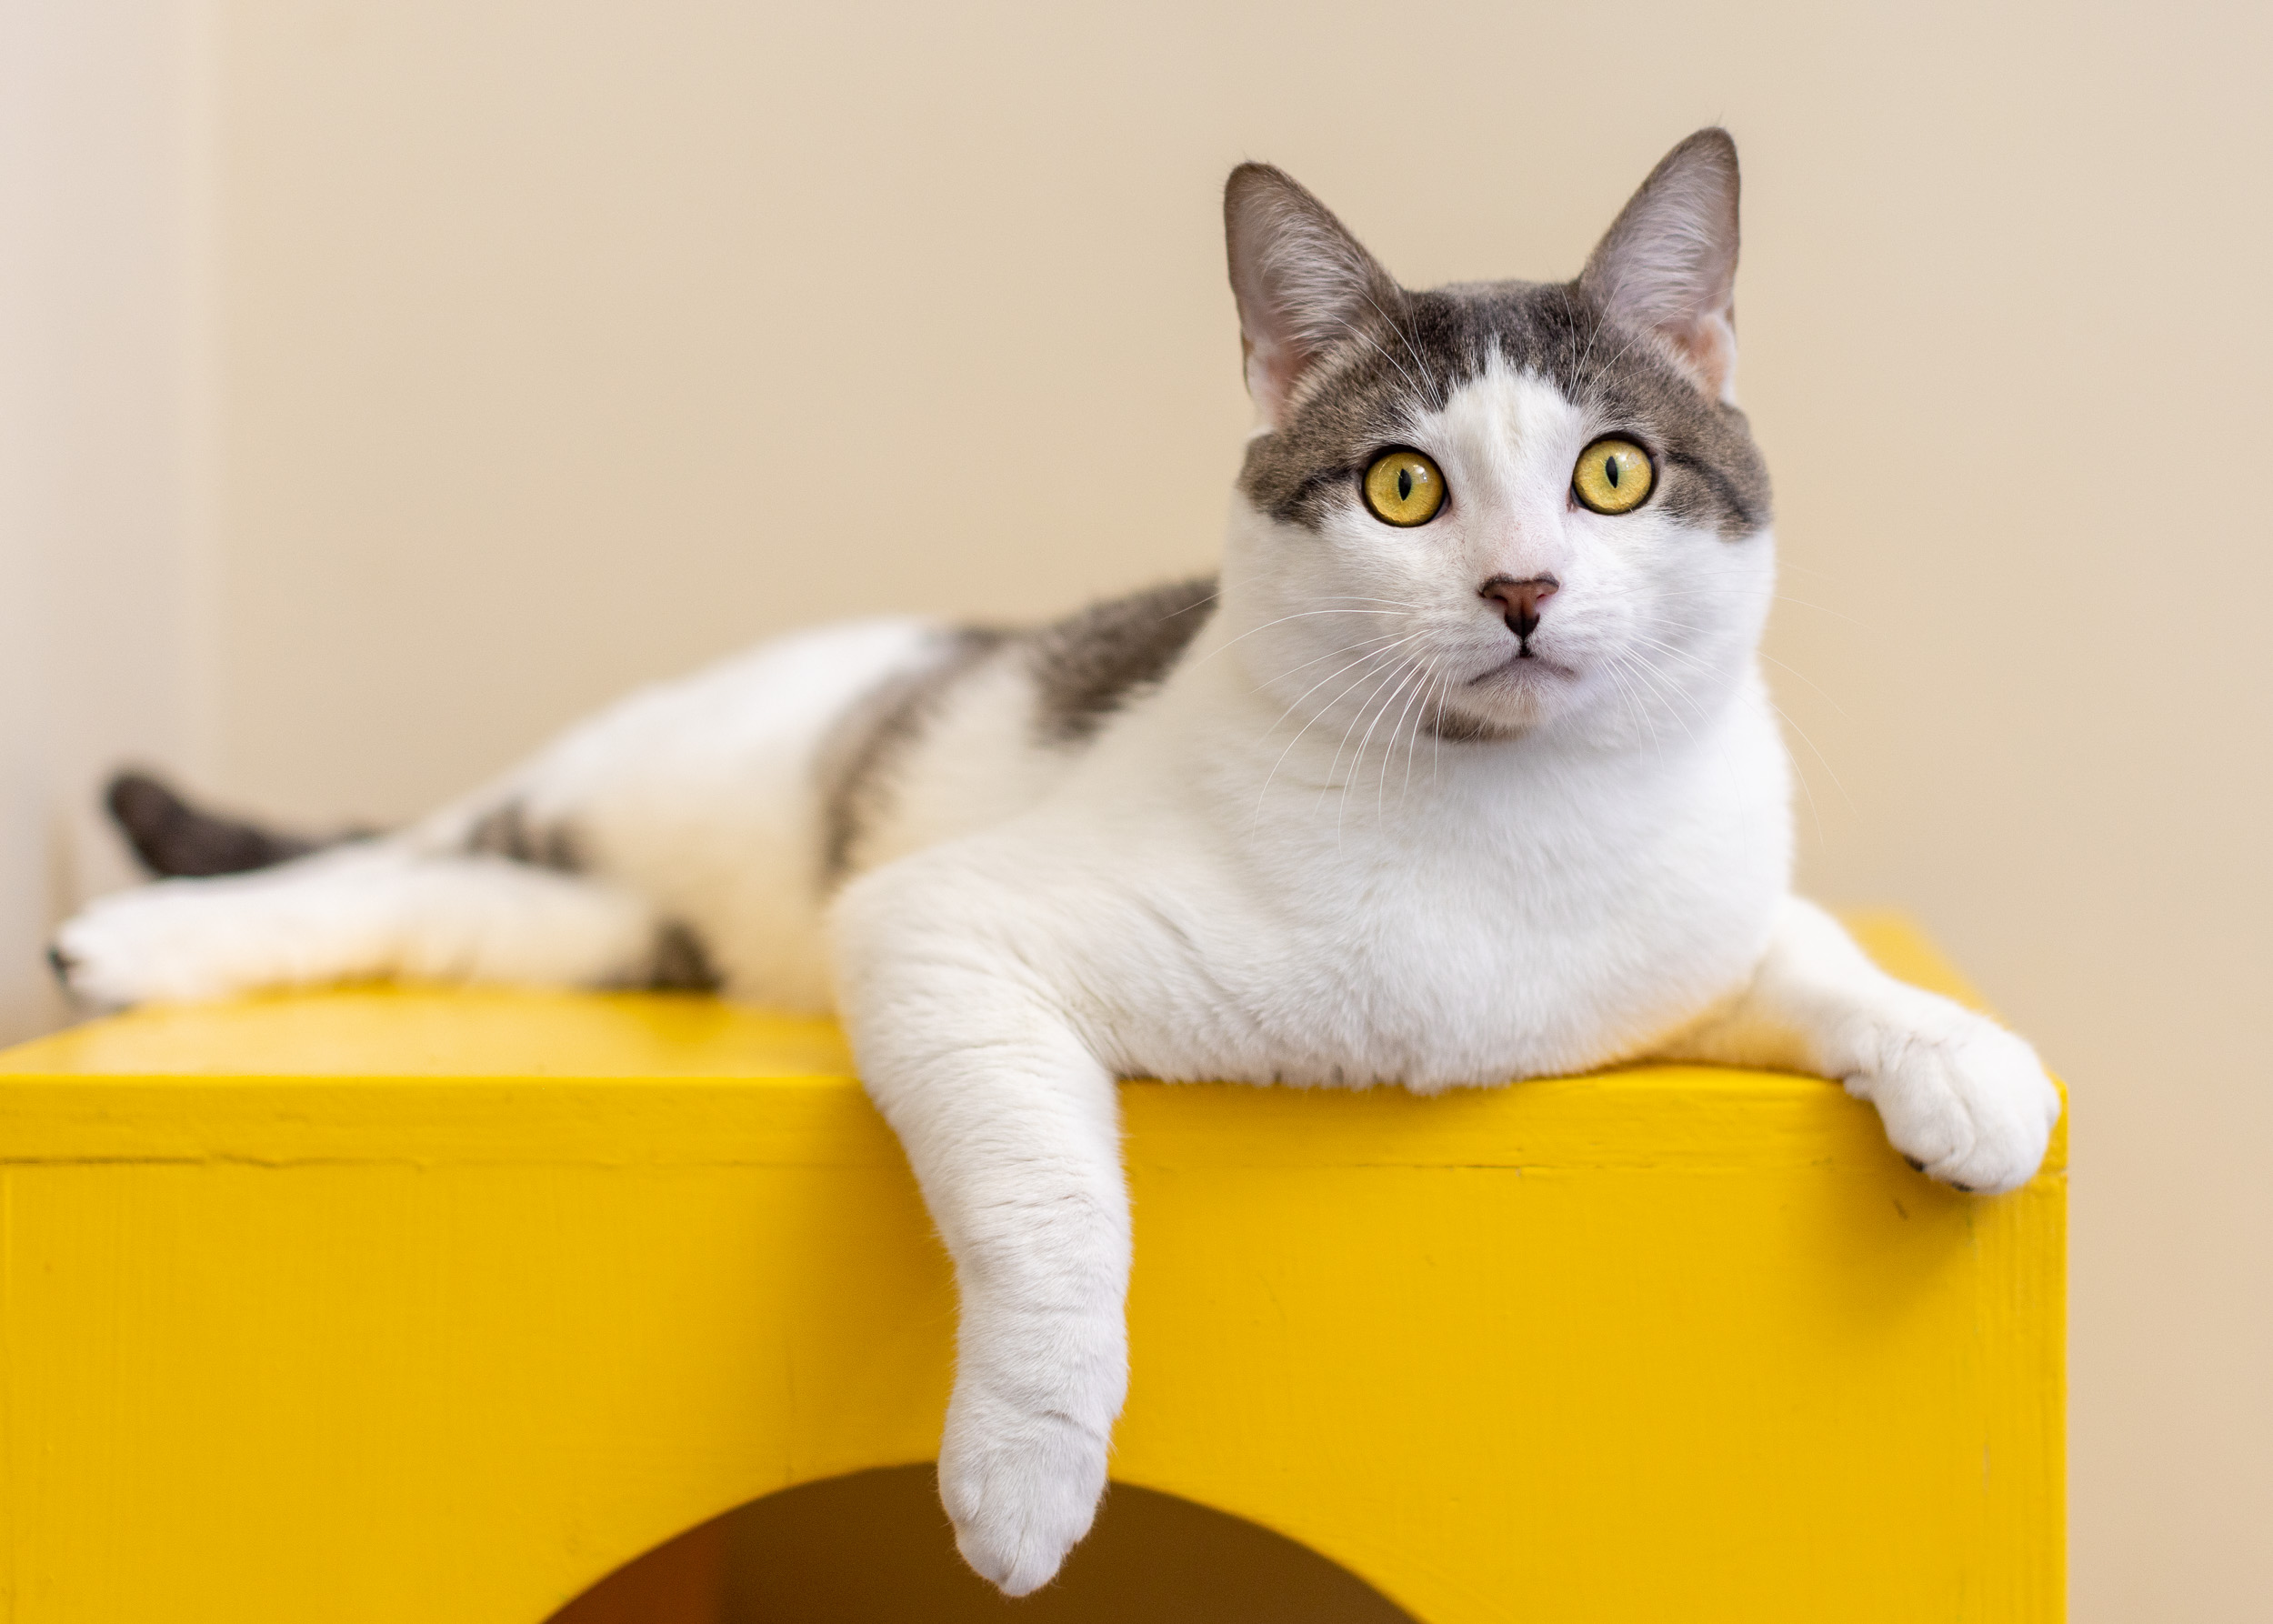 tabby-cat-mix-with-yellow-eyes-lying-on-yellow-box-2185